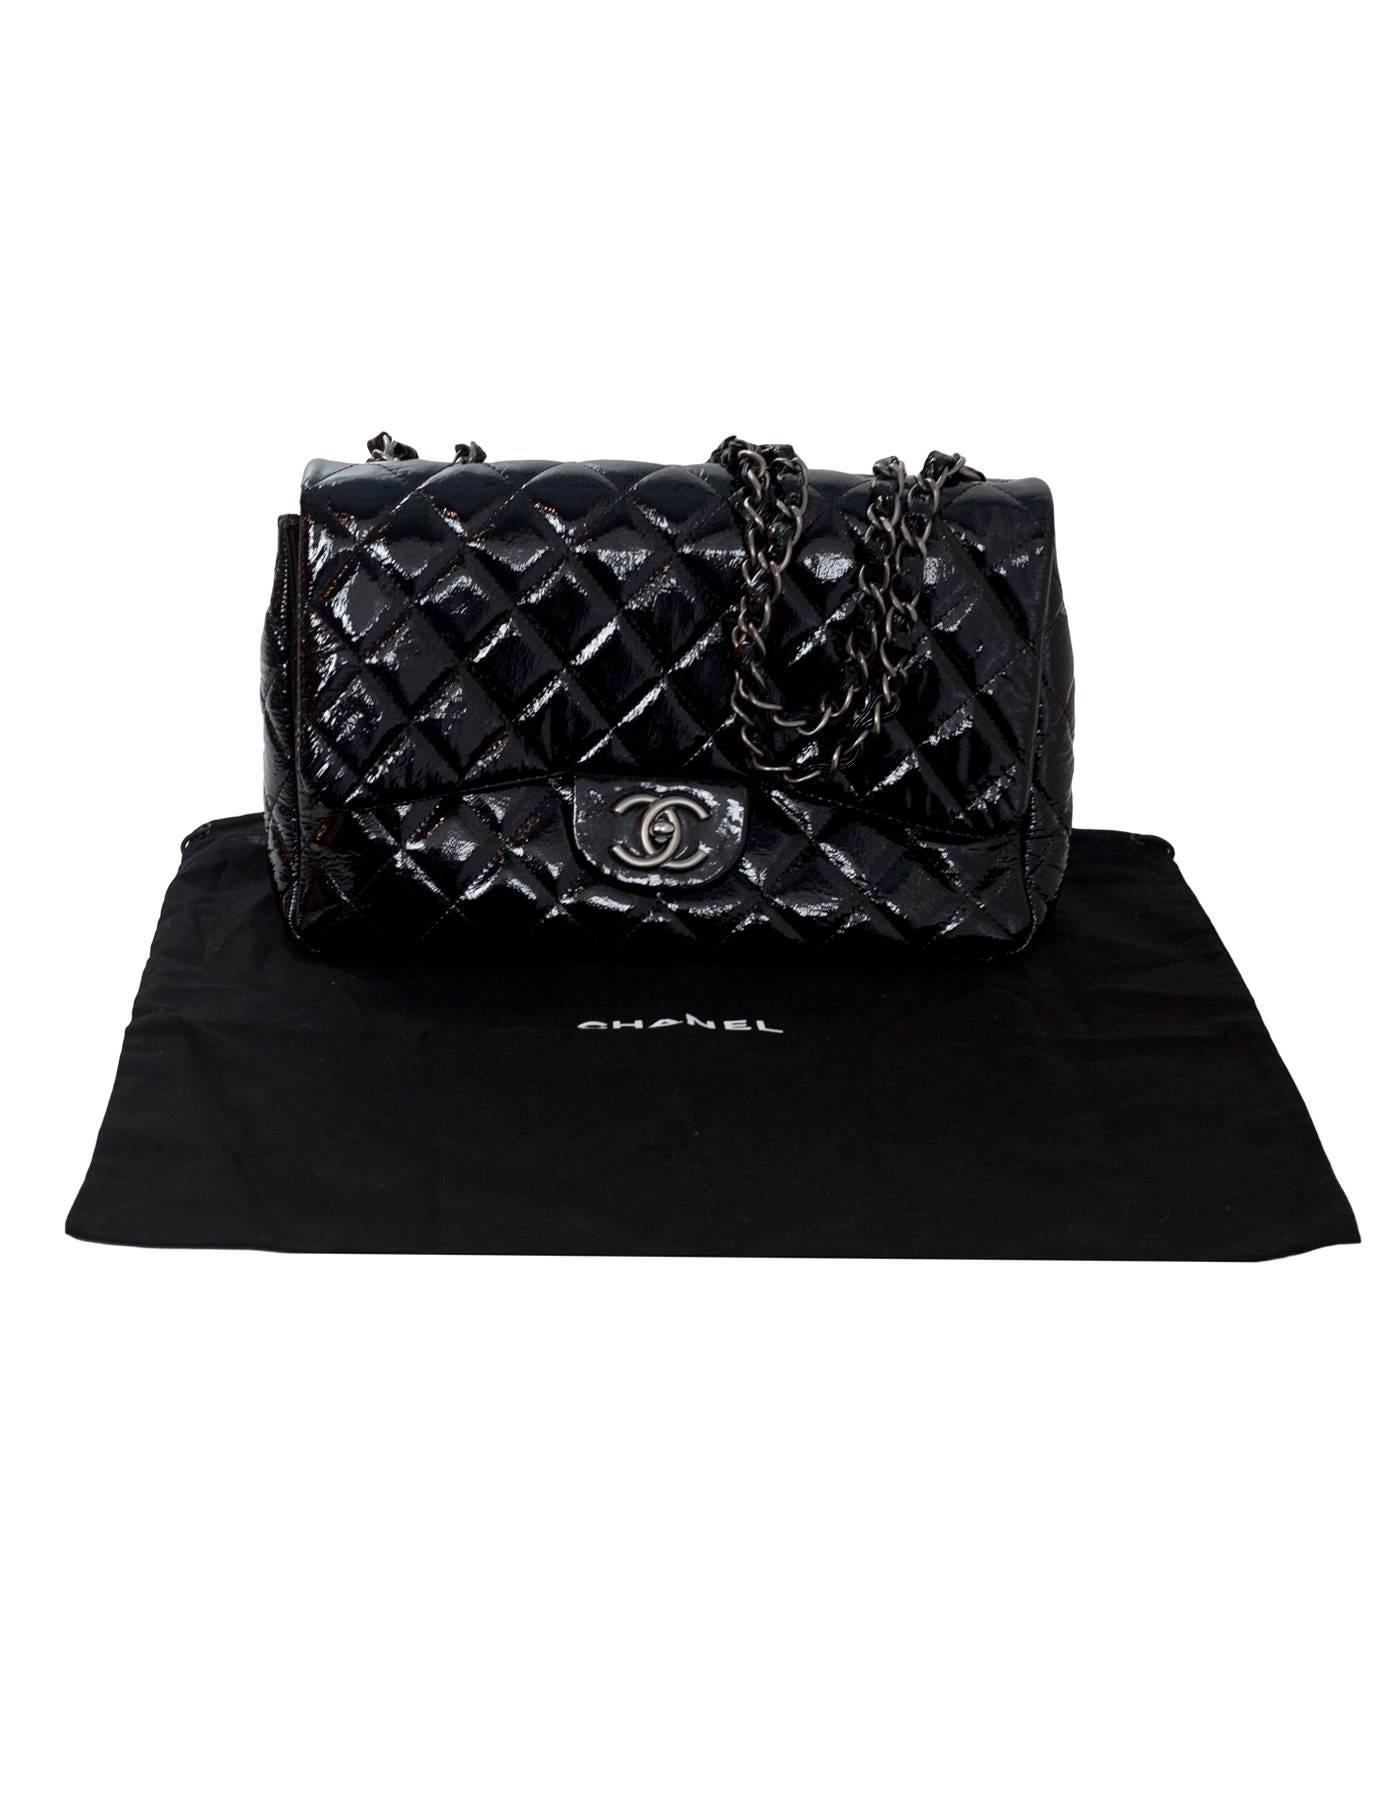 Chanel Black Patent Leather Quilted Classic Jumbo Flap Bag 4